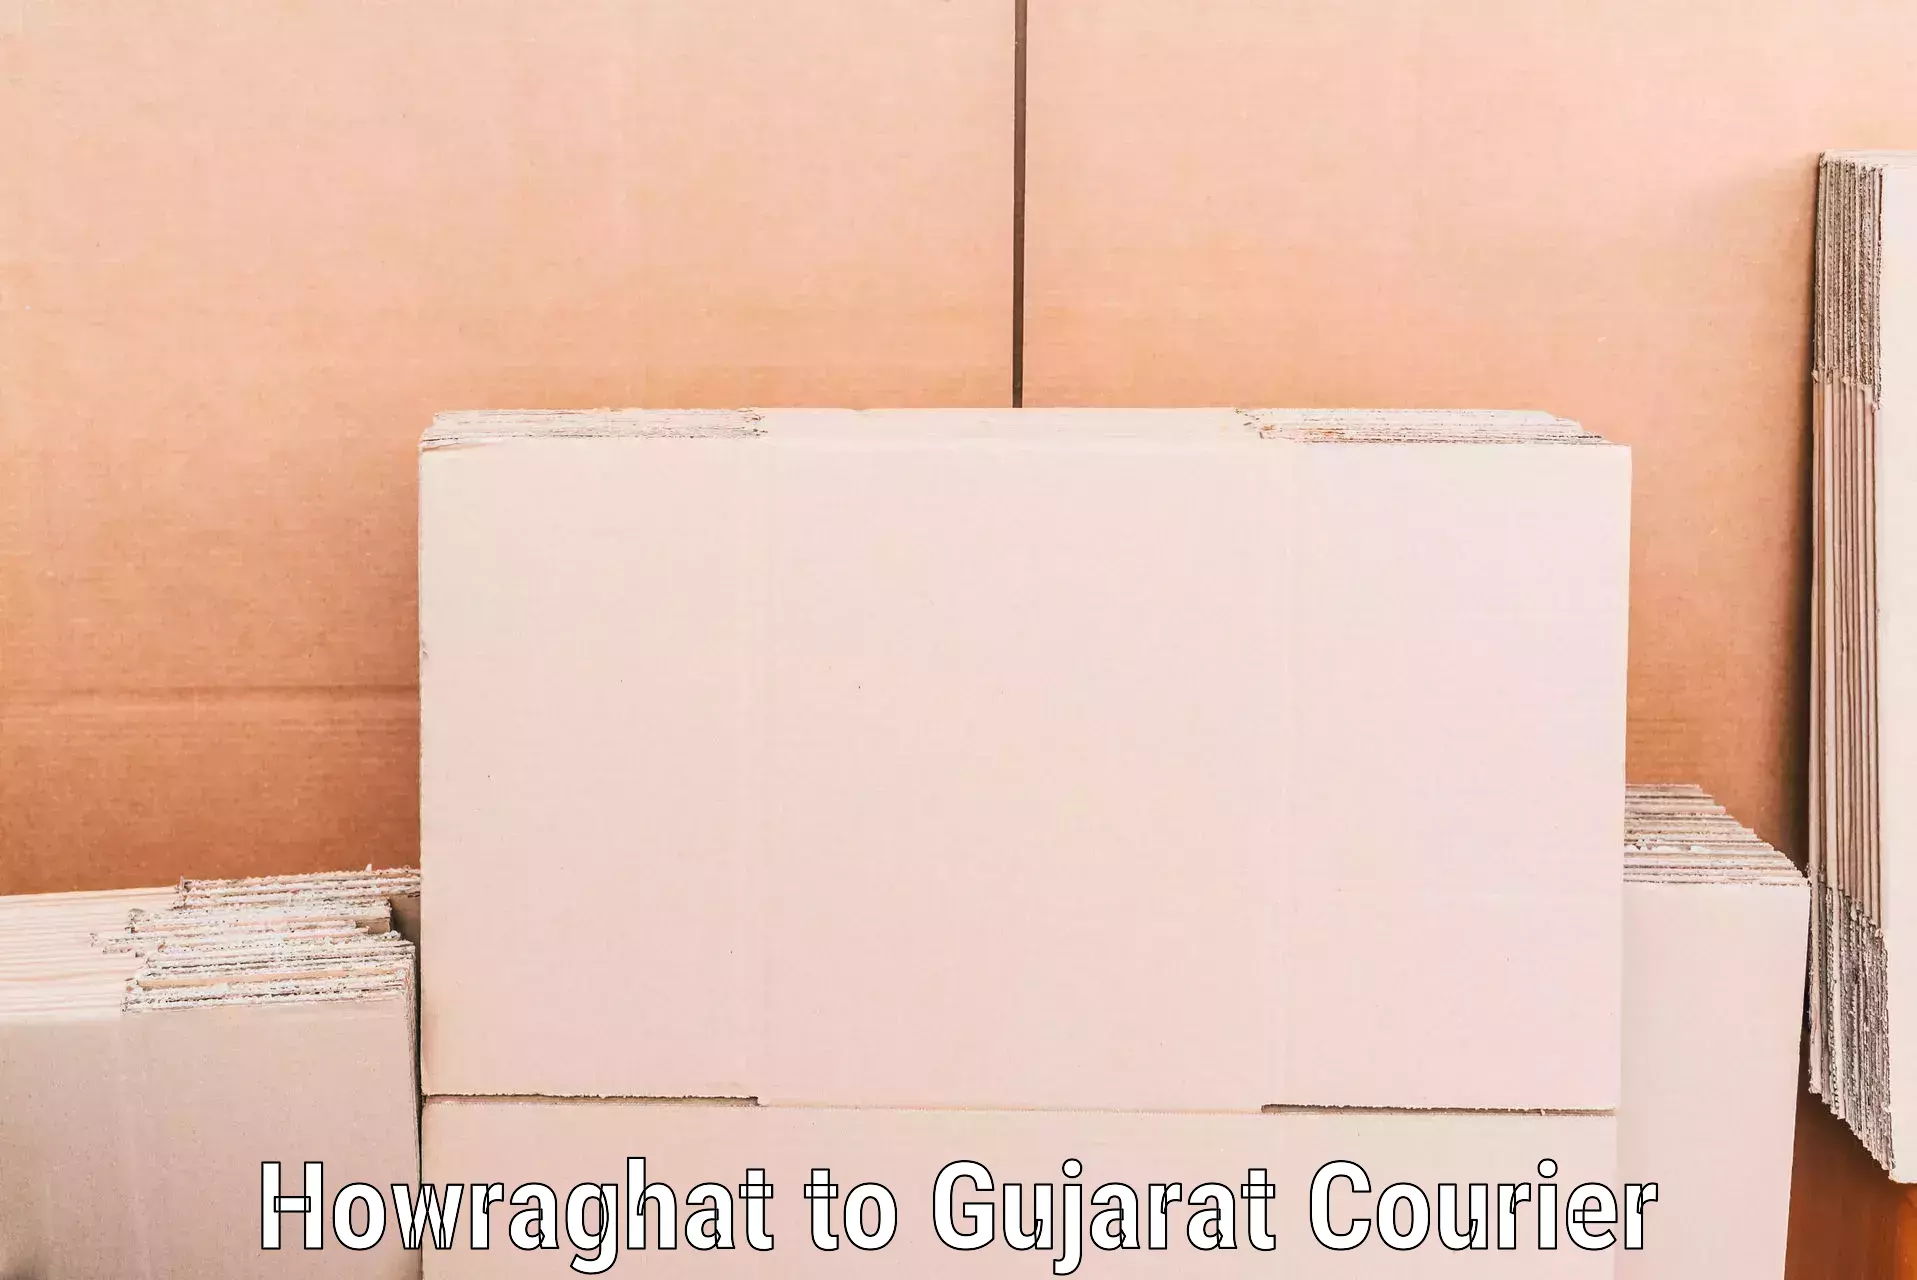 Quality furniture transport Howraghat to Gujarat